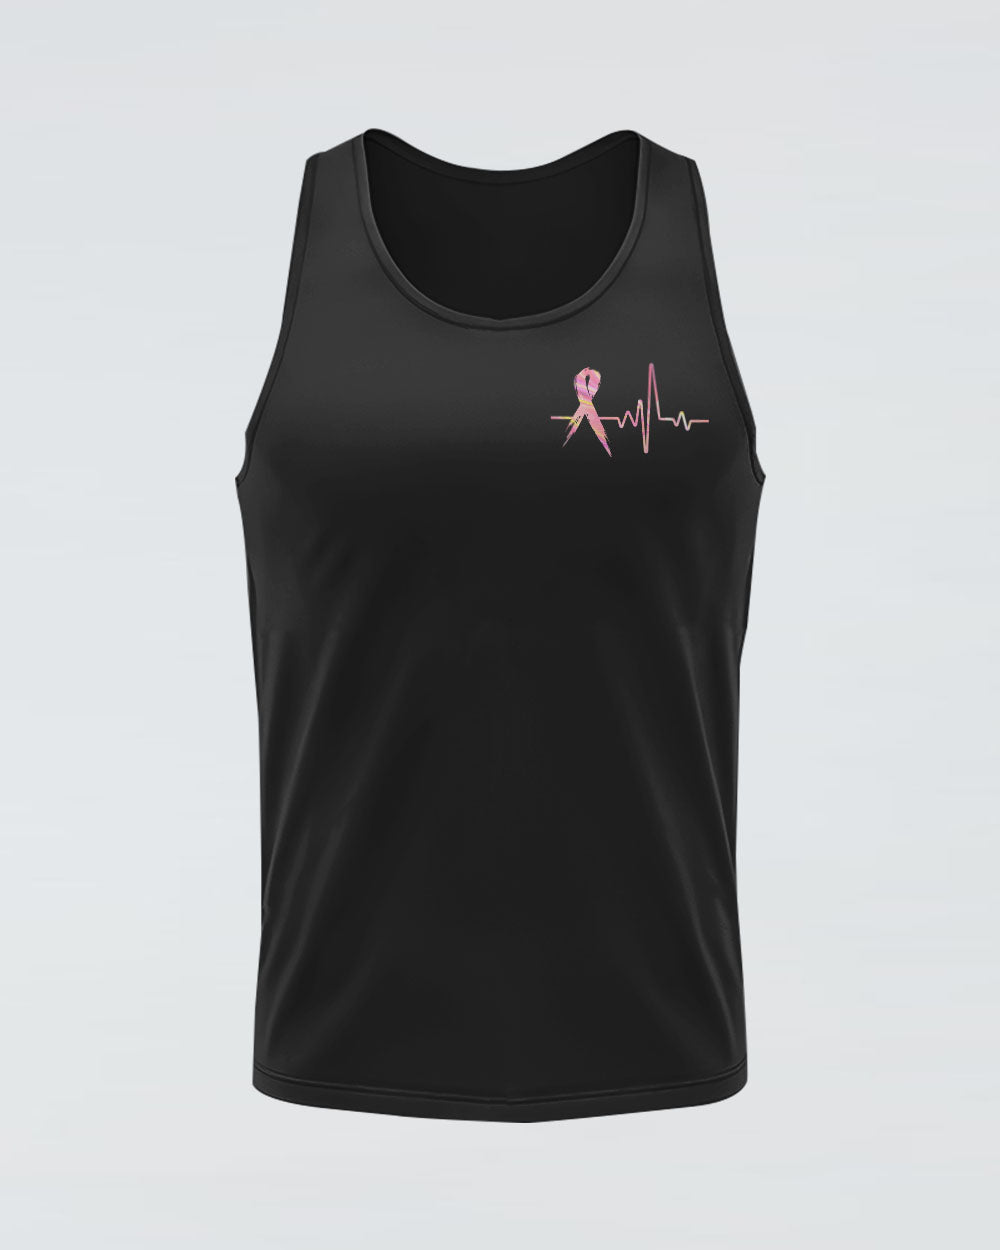 Girls Back The Pink I've Got Your Six Holo Flag Women's Breast Cancer Awareness Tanks